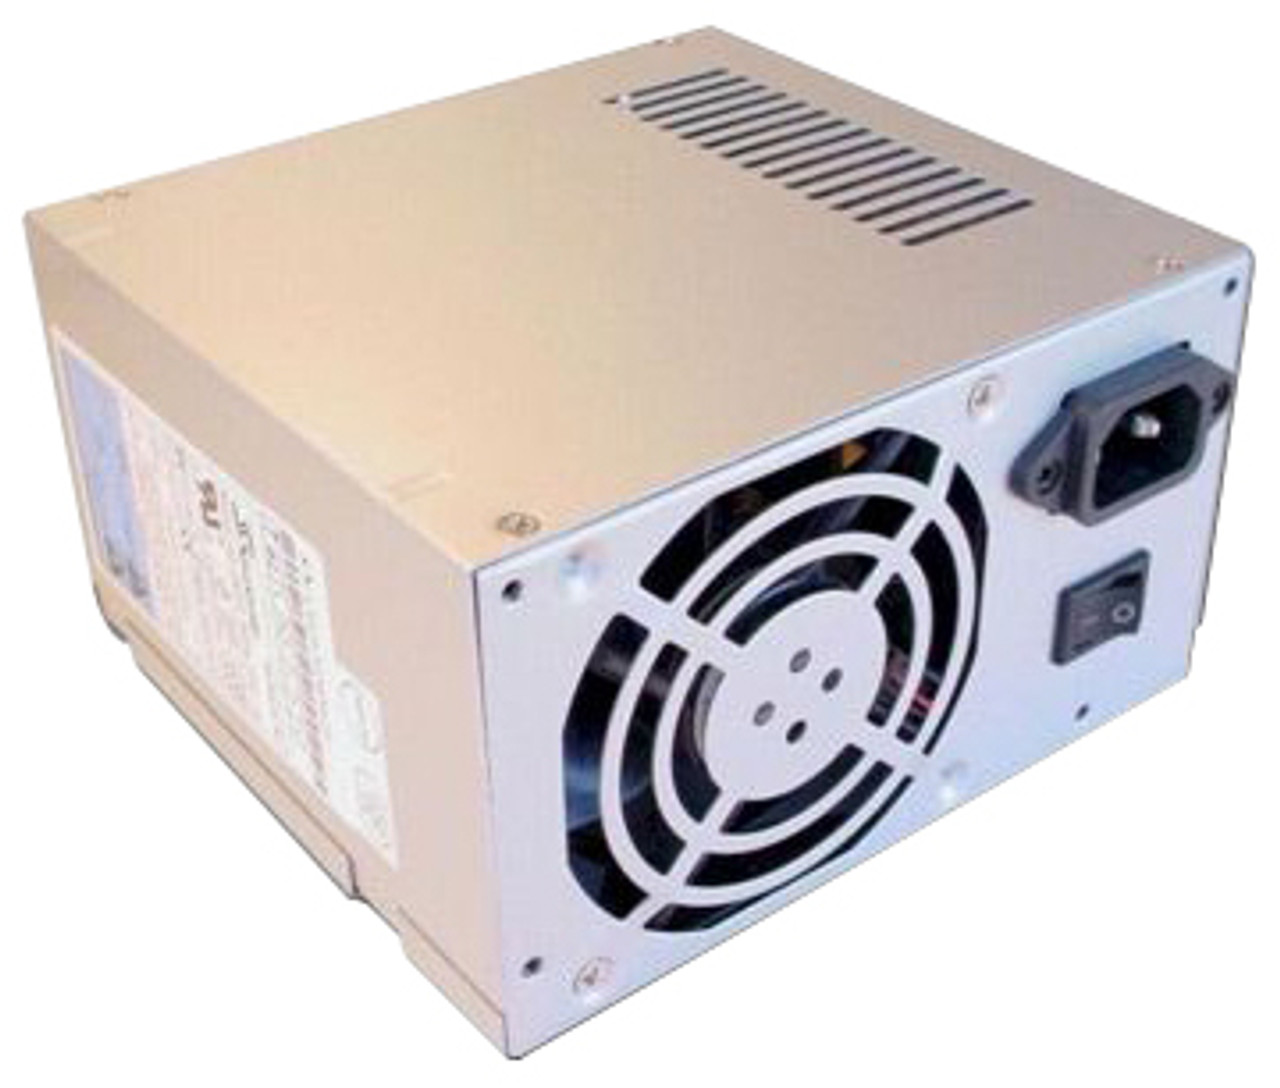 py.30008.014 Acer power supply